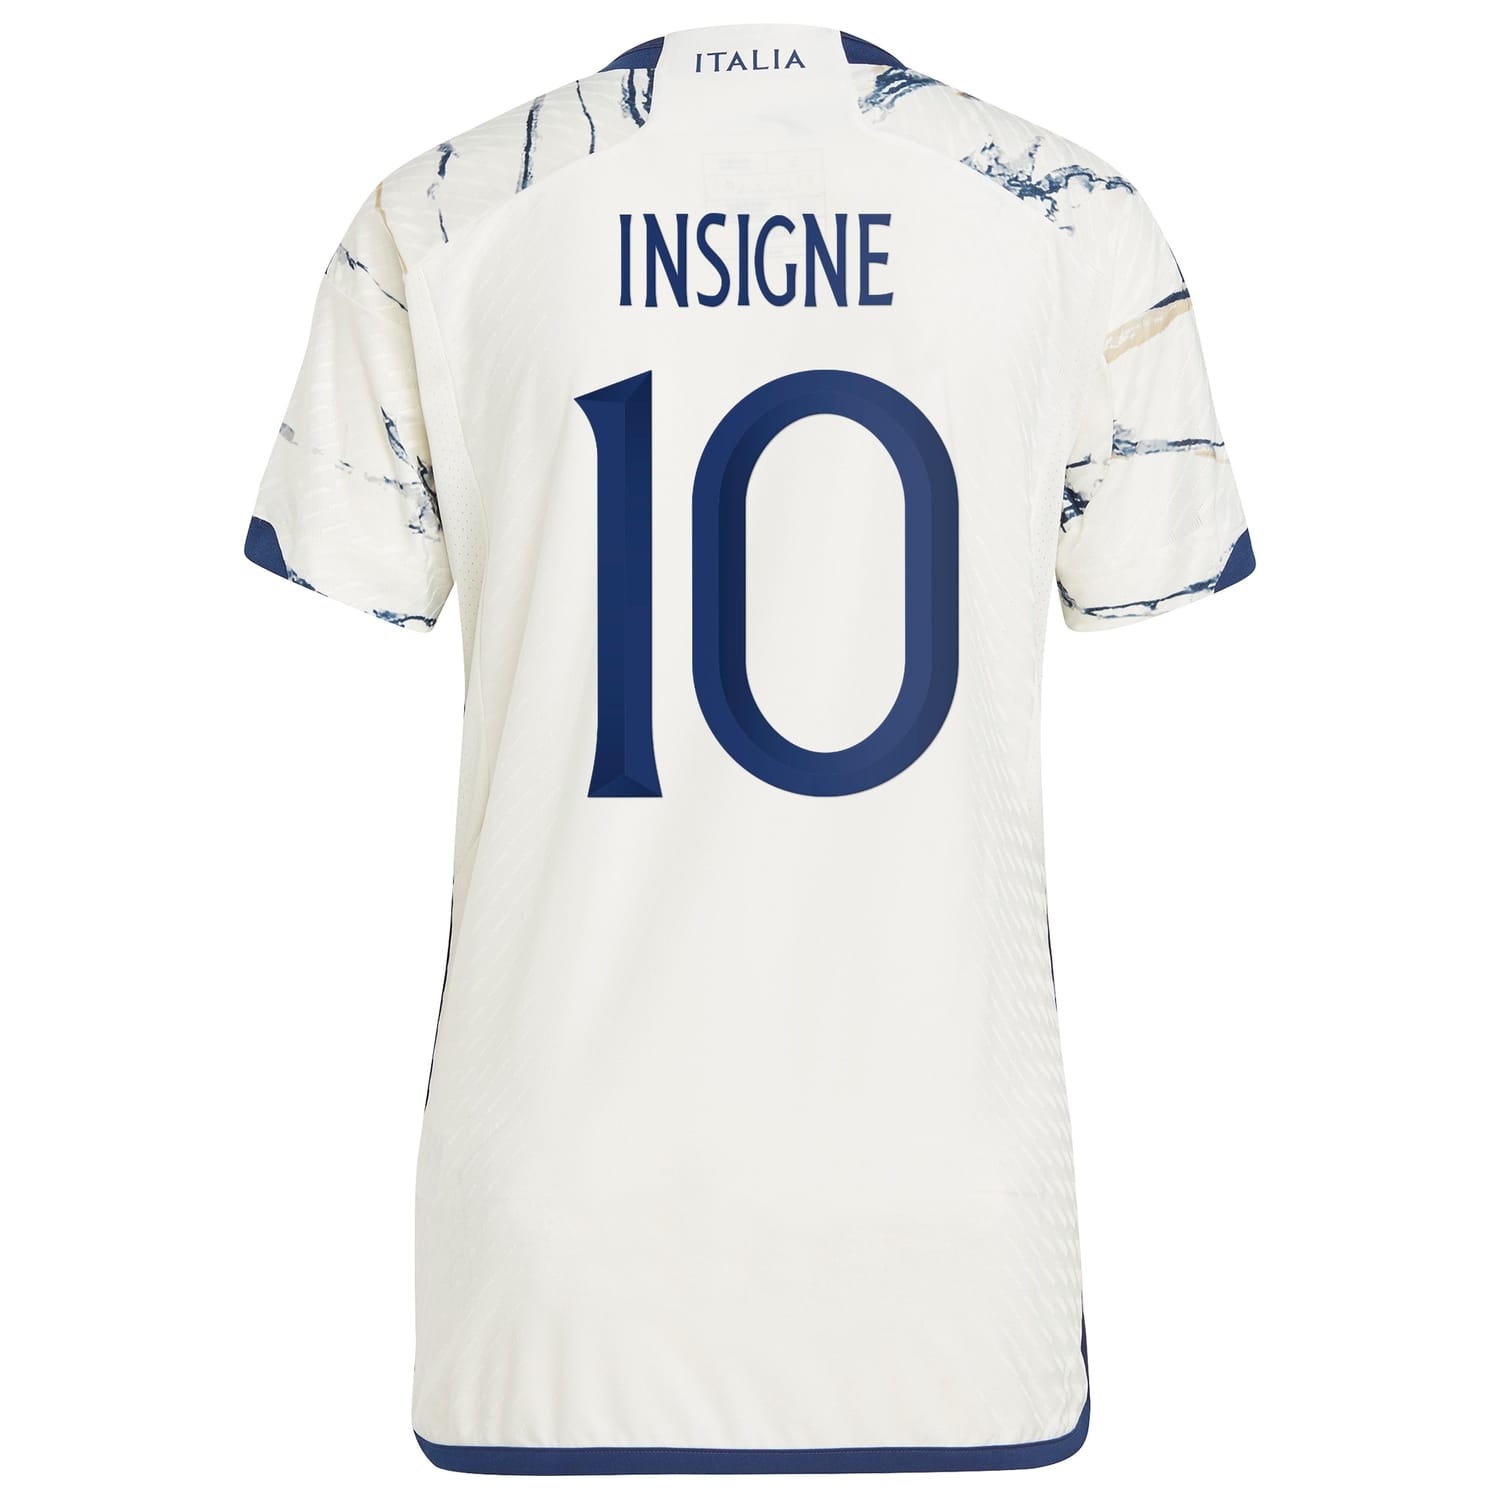 Italy National Team Away Authentic Jersey Shirt White 2023 player Lorenzo Insigne printing for Men